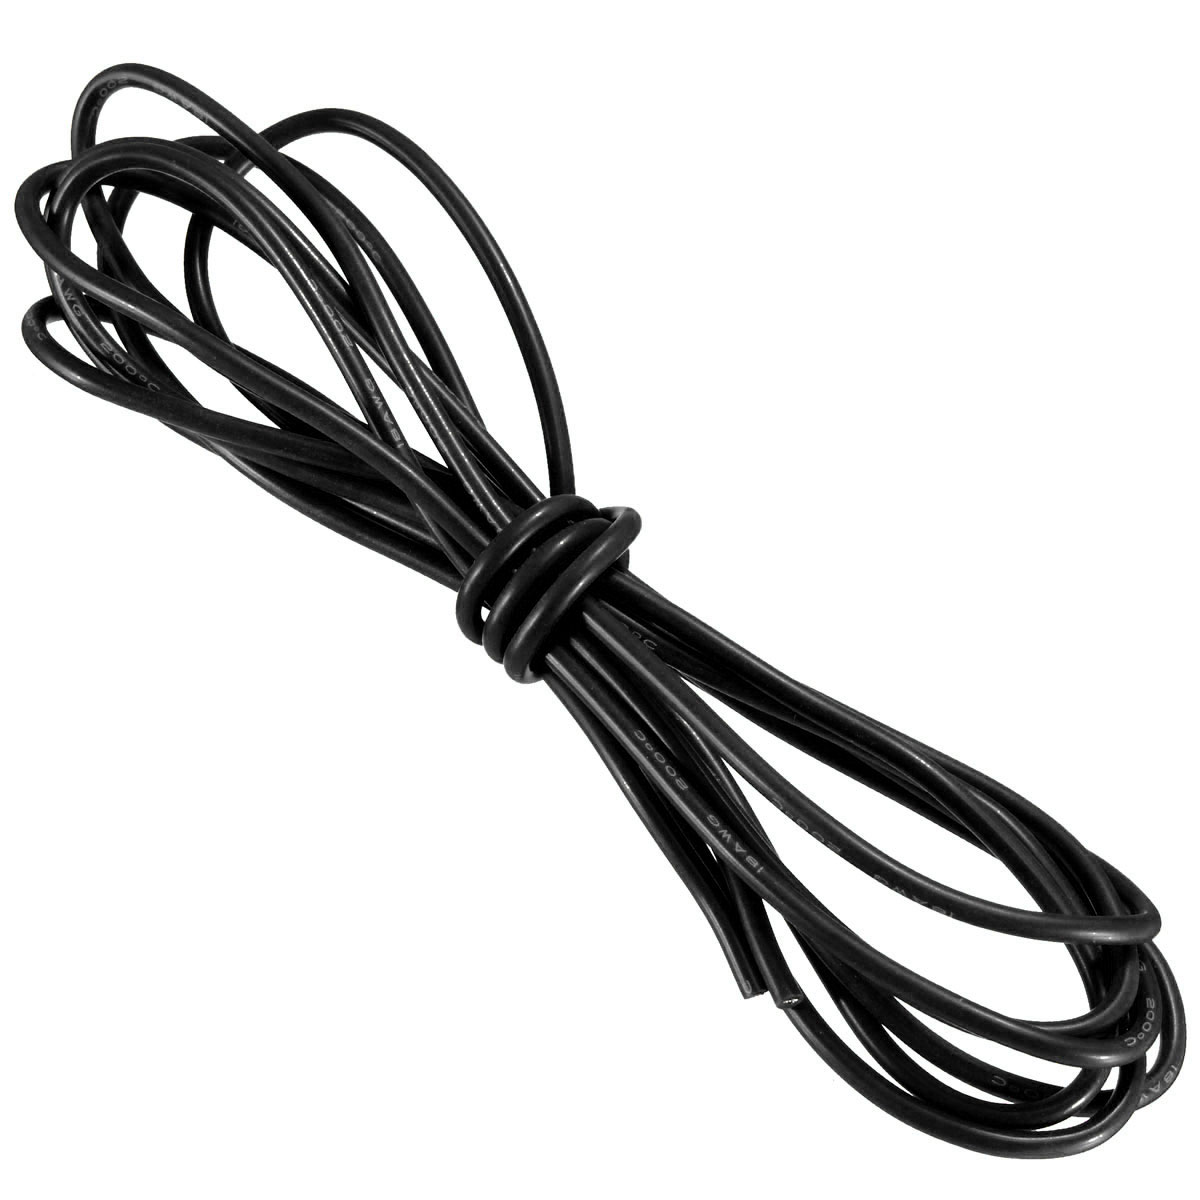 Daniu 2 meter black silicone wire cable 10/12/14/16/18/20/22awg ...